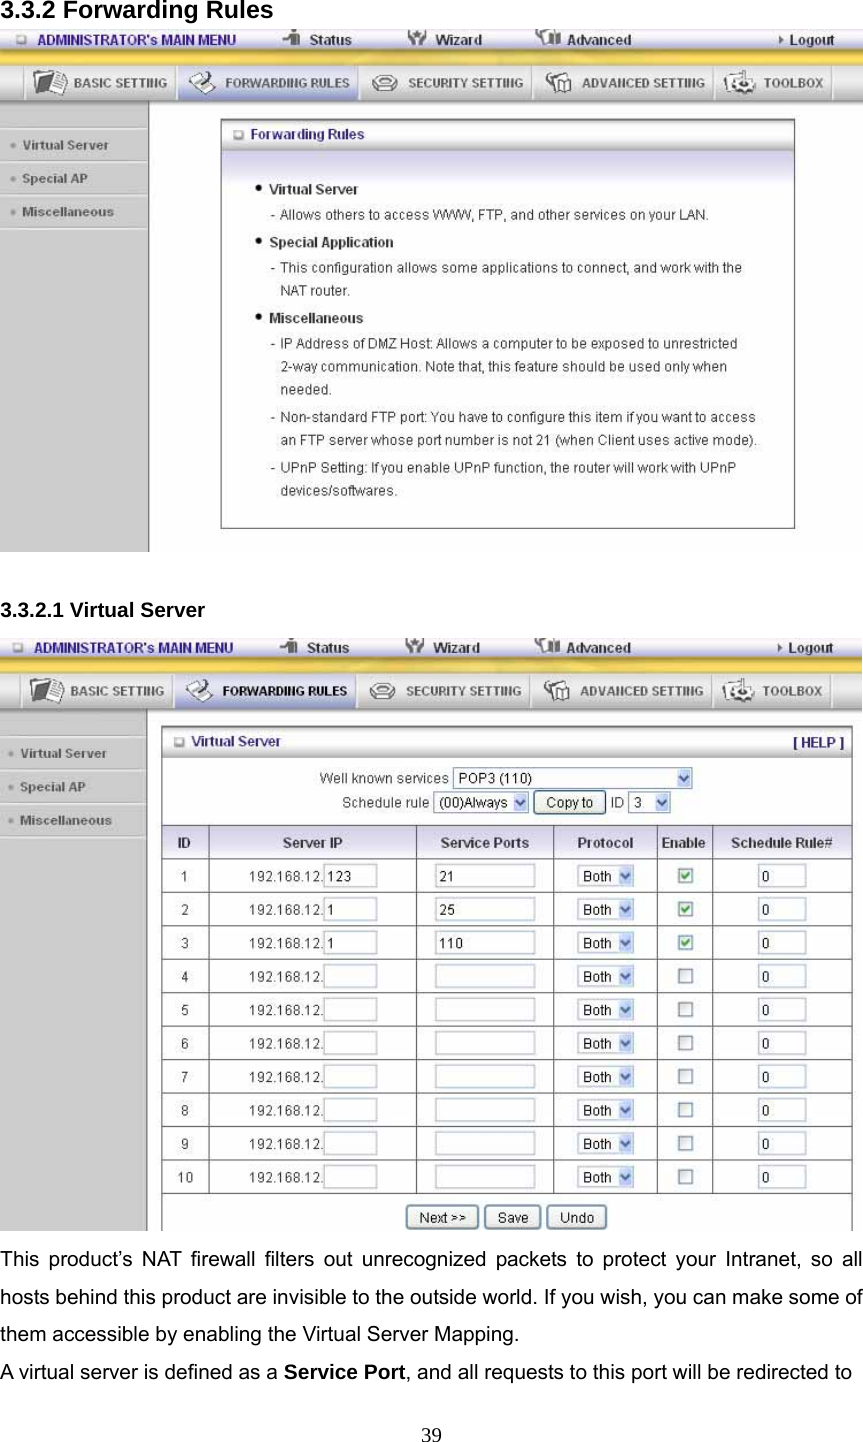  39 3.3.2 Forwarding Rules   3.3.2.1 Virtual Server  This product’s NAT firewall filters out unrecognized packets to protect your Intranet, so all hosts behind this product are invisible to the outside world. If you wish, you can make some of them accessible by enabling the Virtual Server Mapping. A virtual server is defined as a Service Port, and all requests to this port will be redirected to 